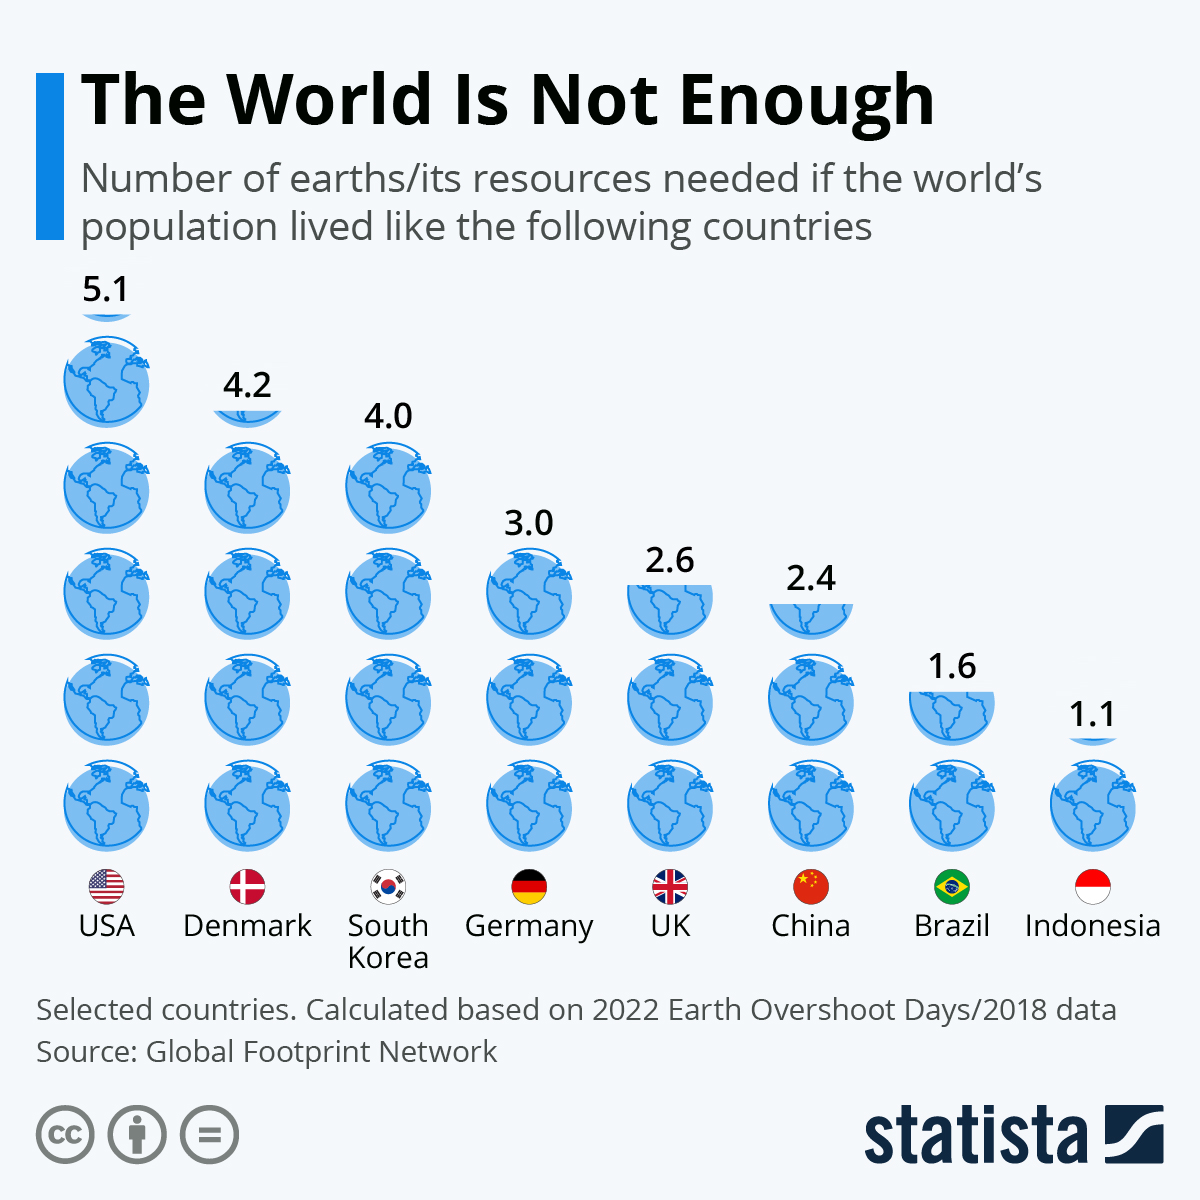 The number of Earths needed if the world's population lived like the countries listed (illustration by Statista CC BY-ND)